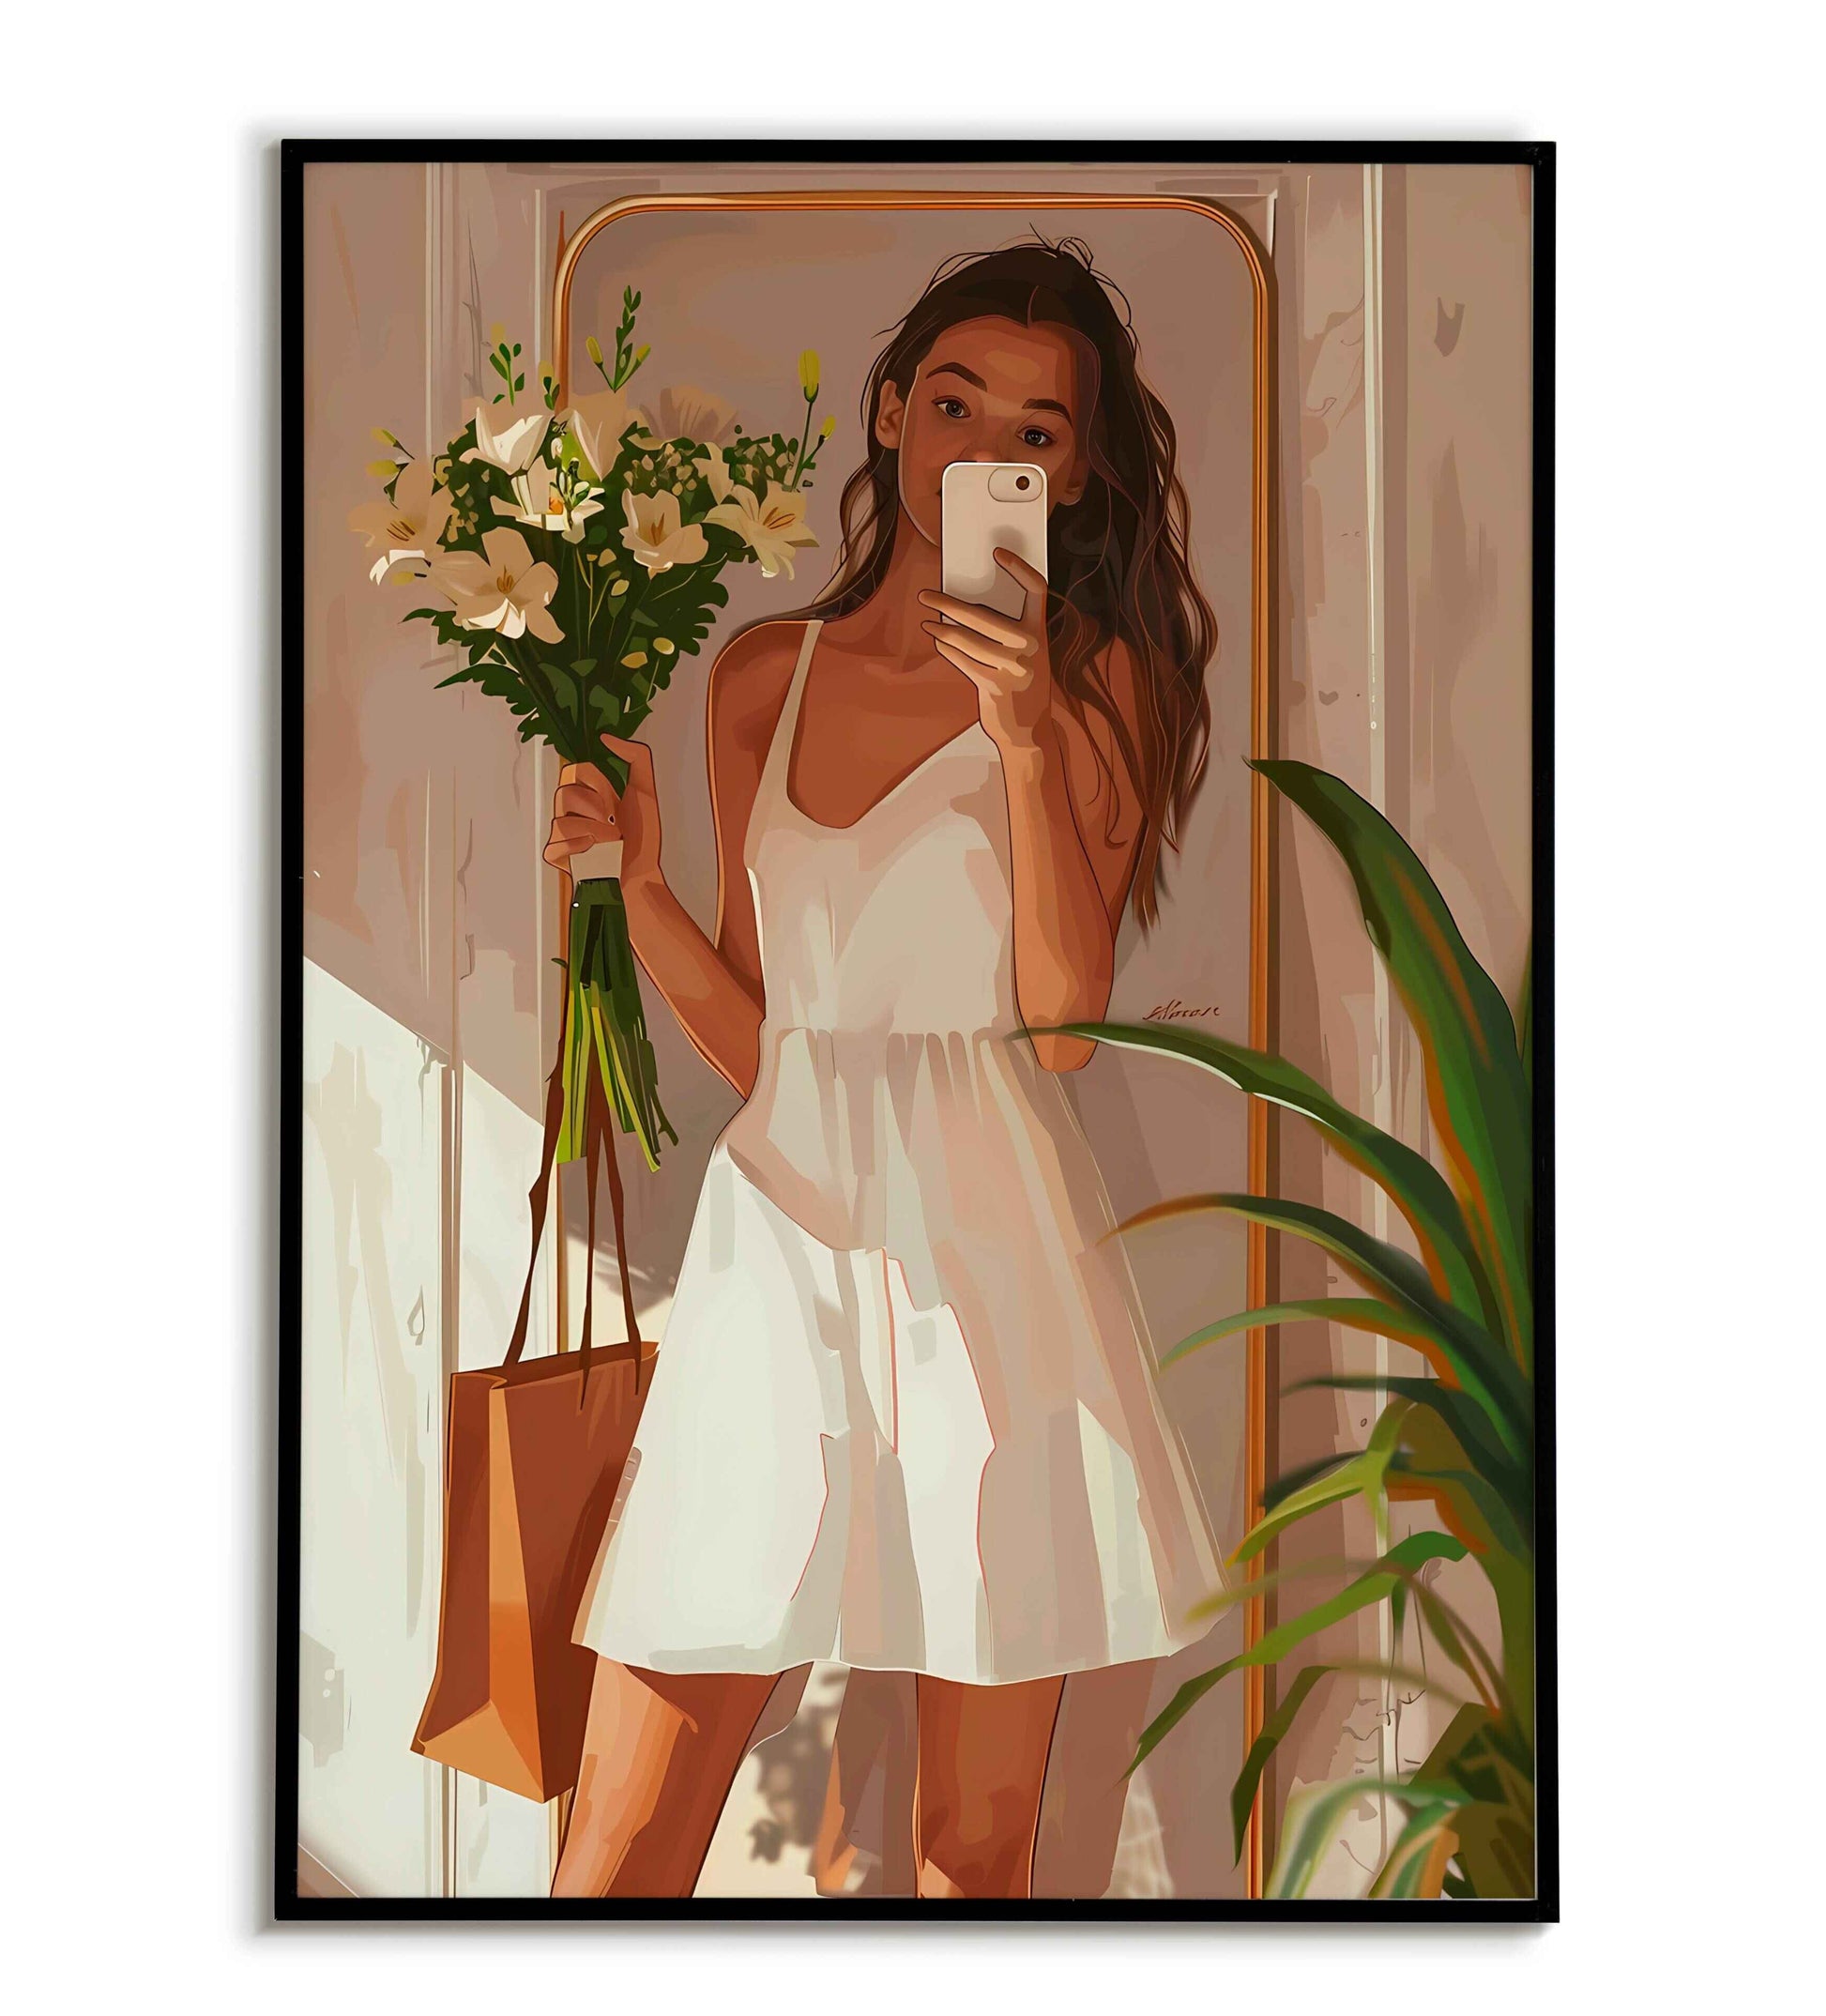 Mirror Selfie(1 of 5) printable poster. Available for purchase as a physical poster or digital download.